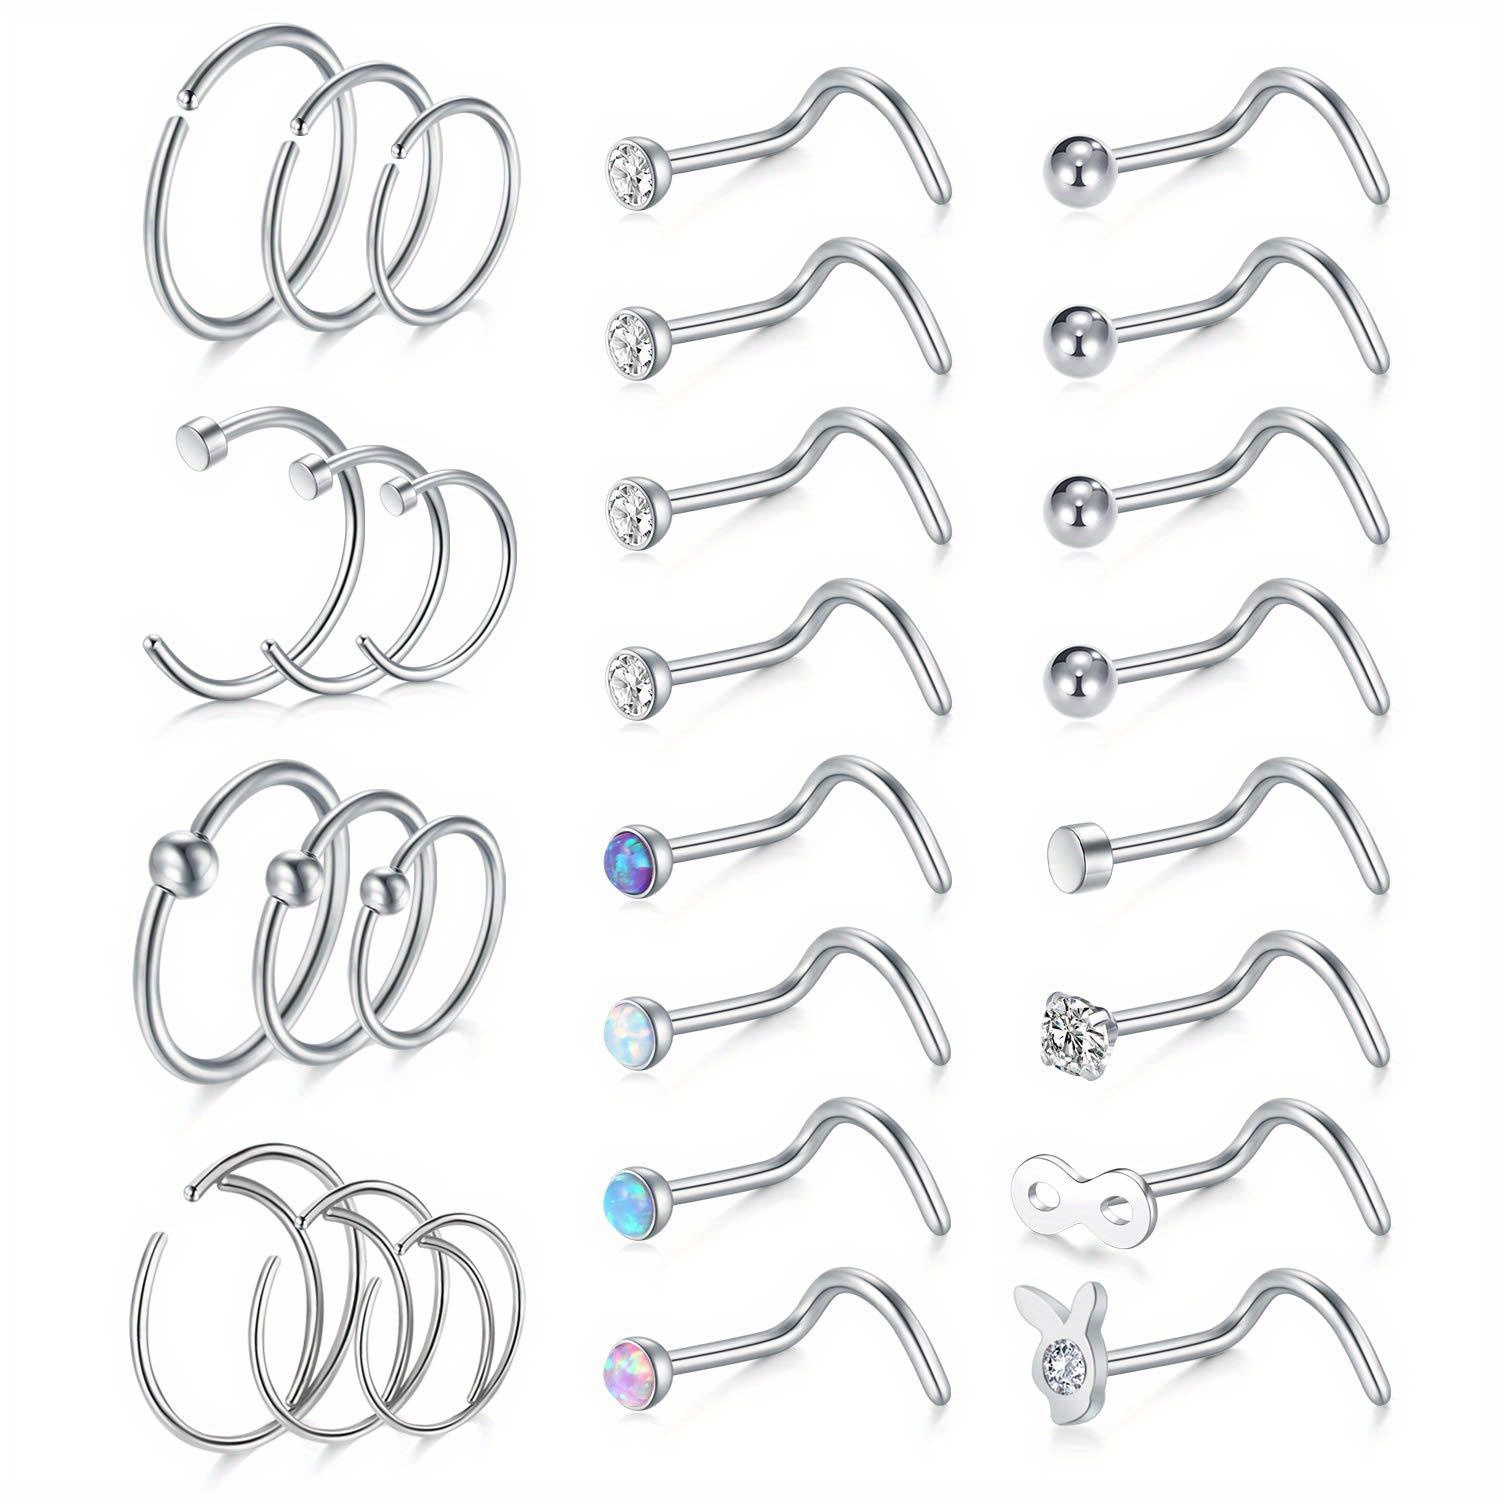 28pcs/set Nose Stud Rings Pack 20G Stainless Steel Silver, 50% OFF